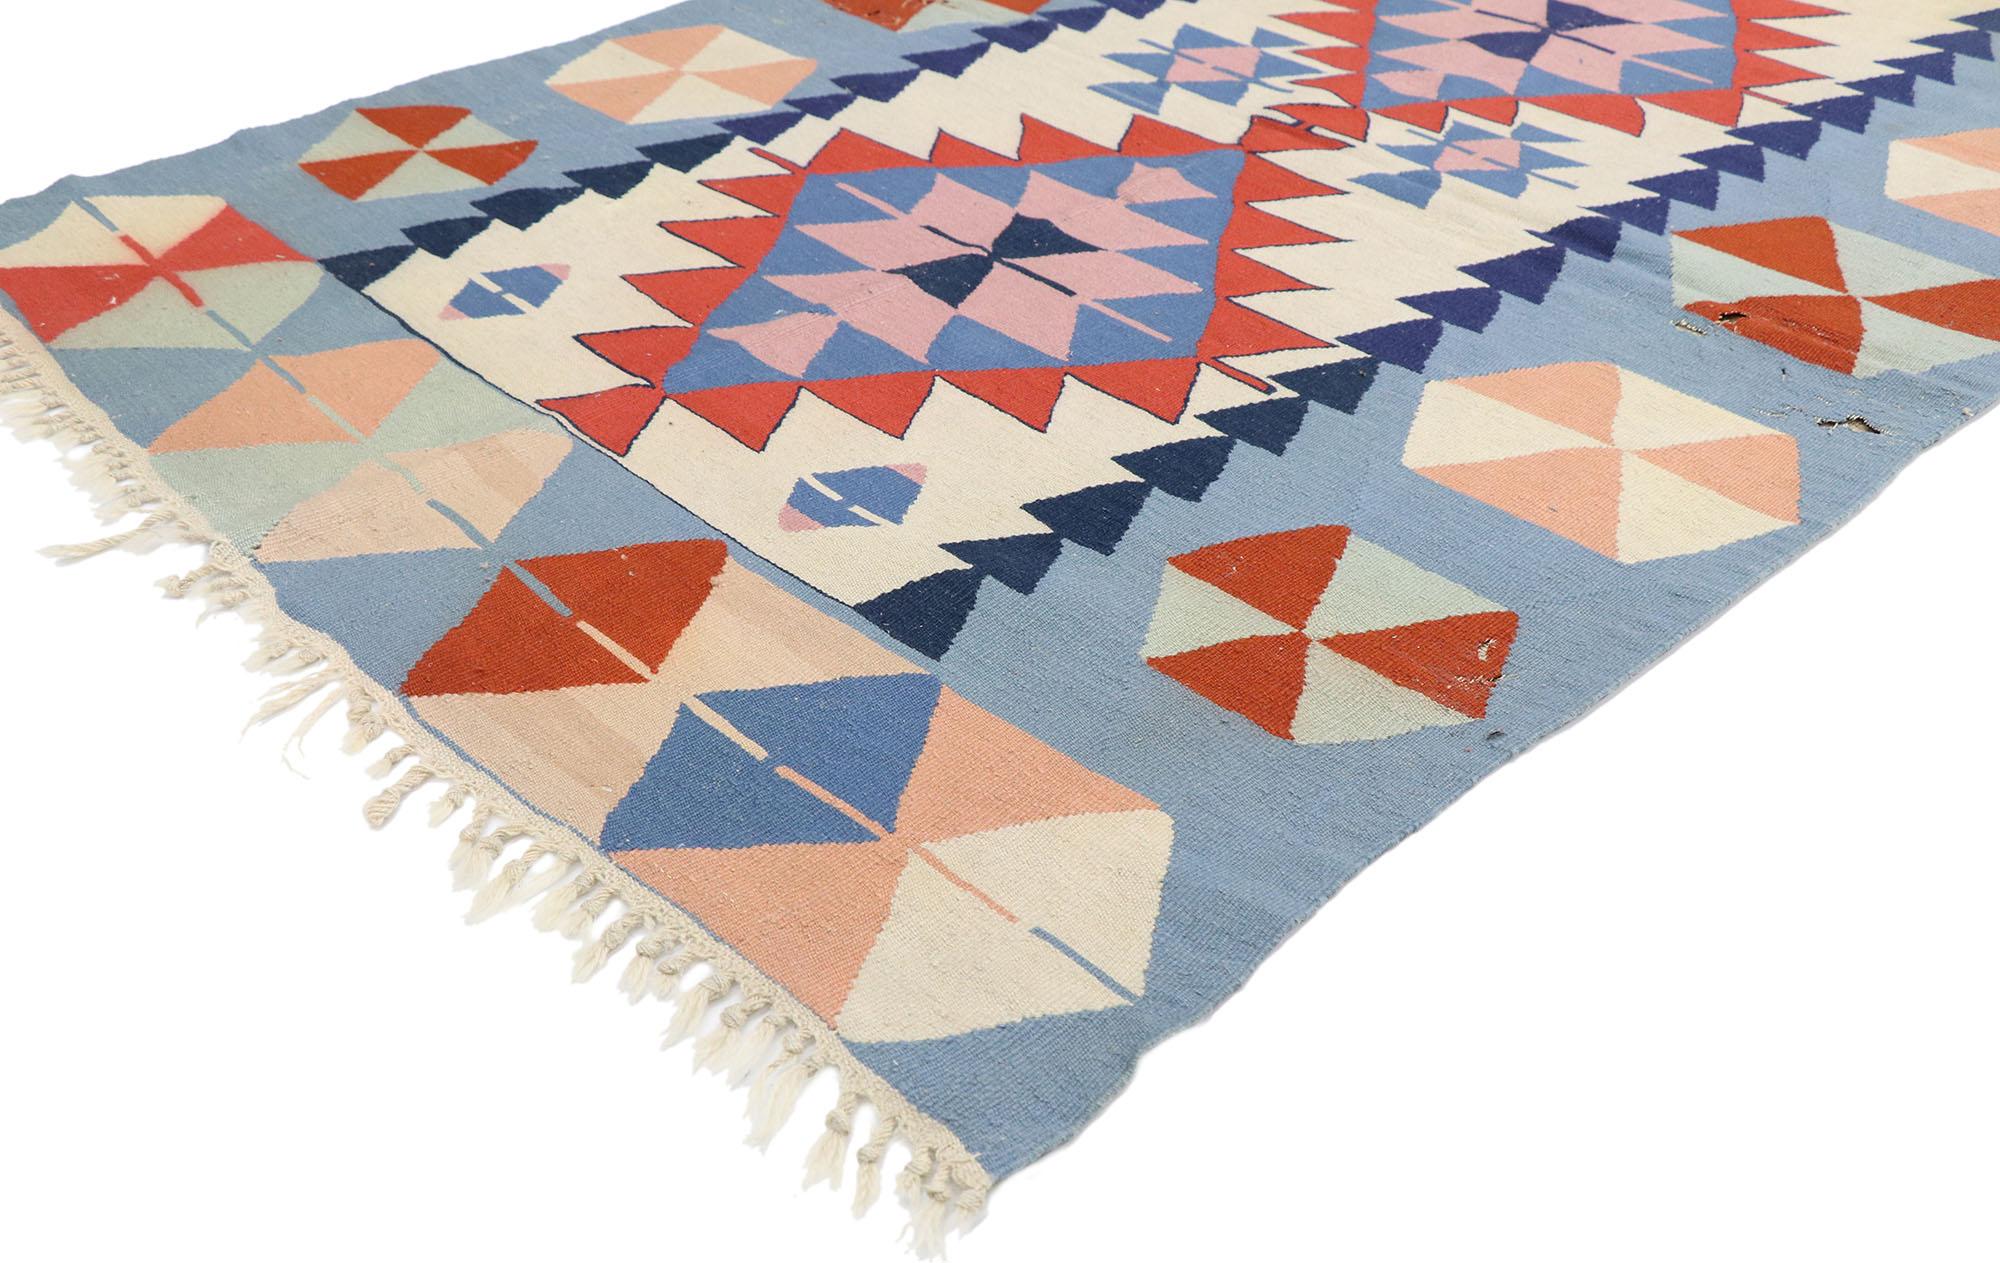 77822 Distressed Vintage Persian Shiraz Kilim rug with Bohemian Tribal Style 04'01 x 05'09. Full of tiny details and a bold expressive design combined with vibrant colors and tribal style, this hand-woven wool vintage Persian Shiraz kilim rug is a